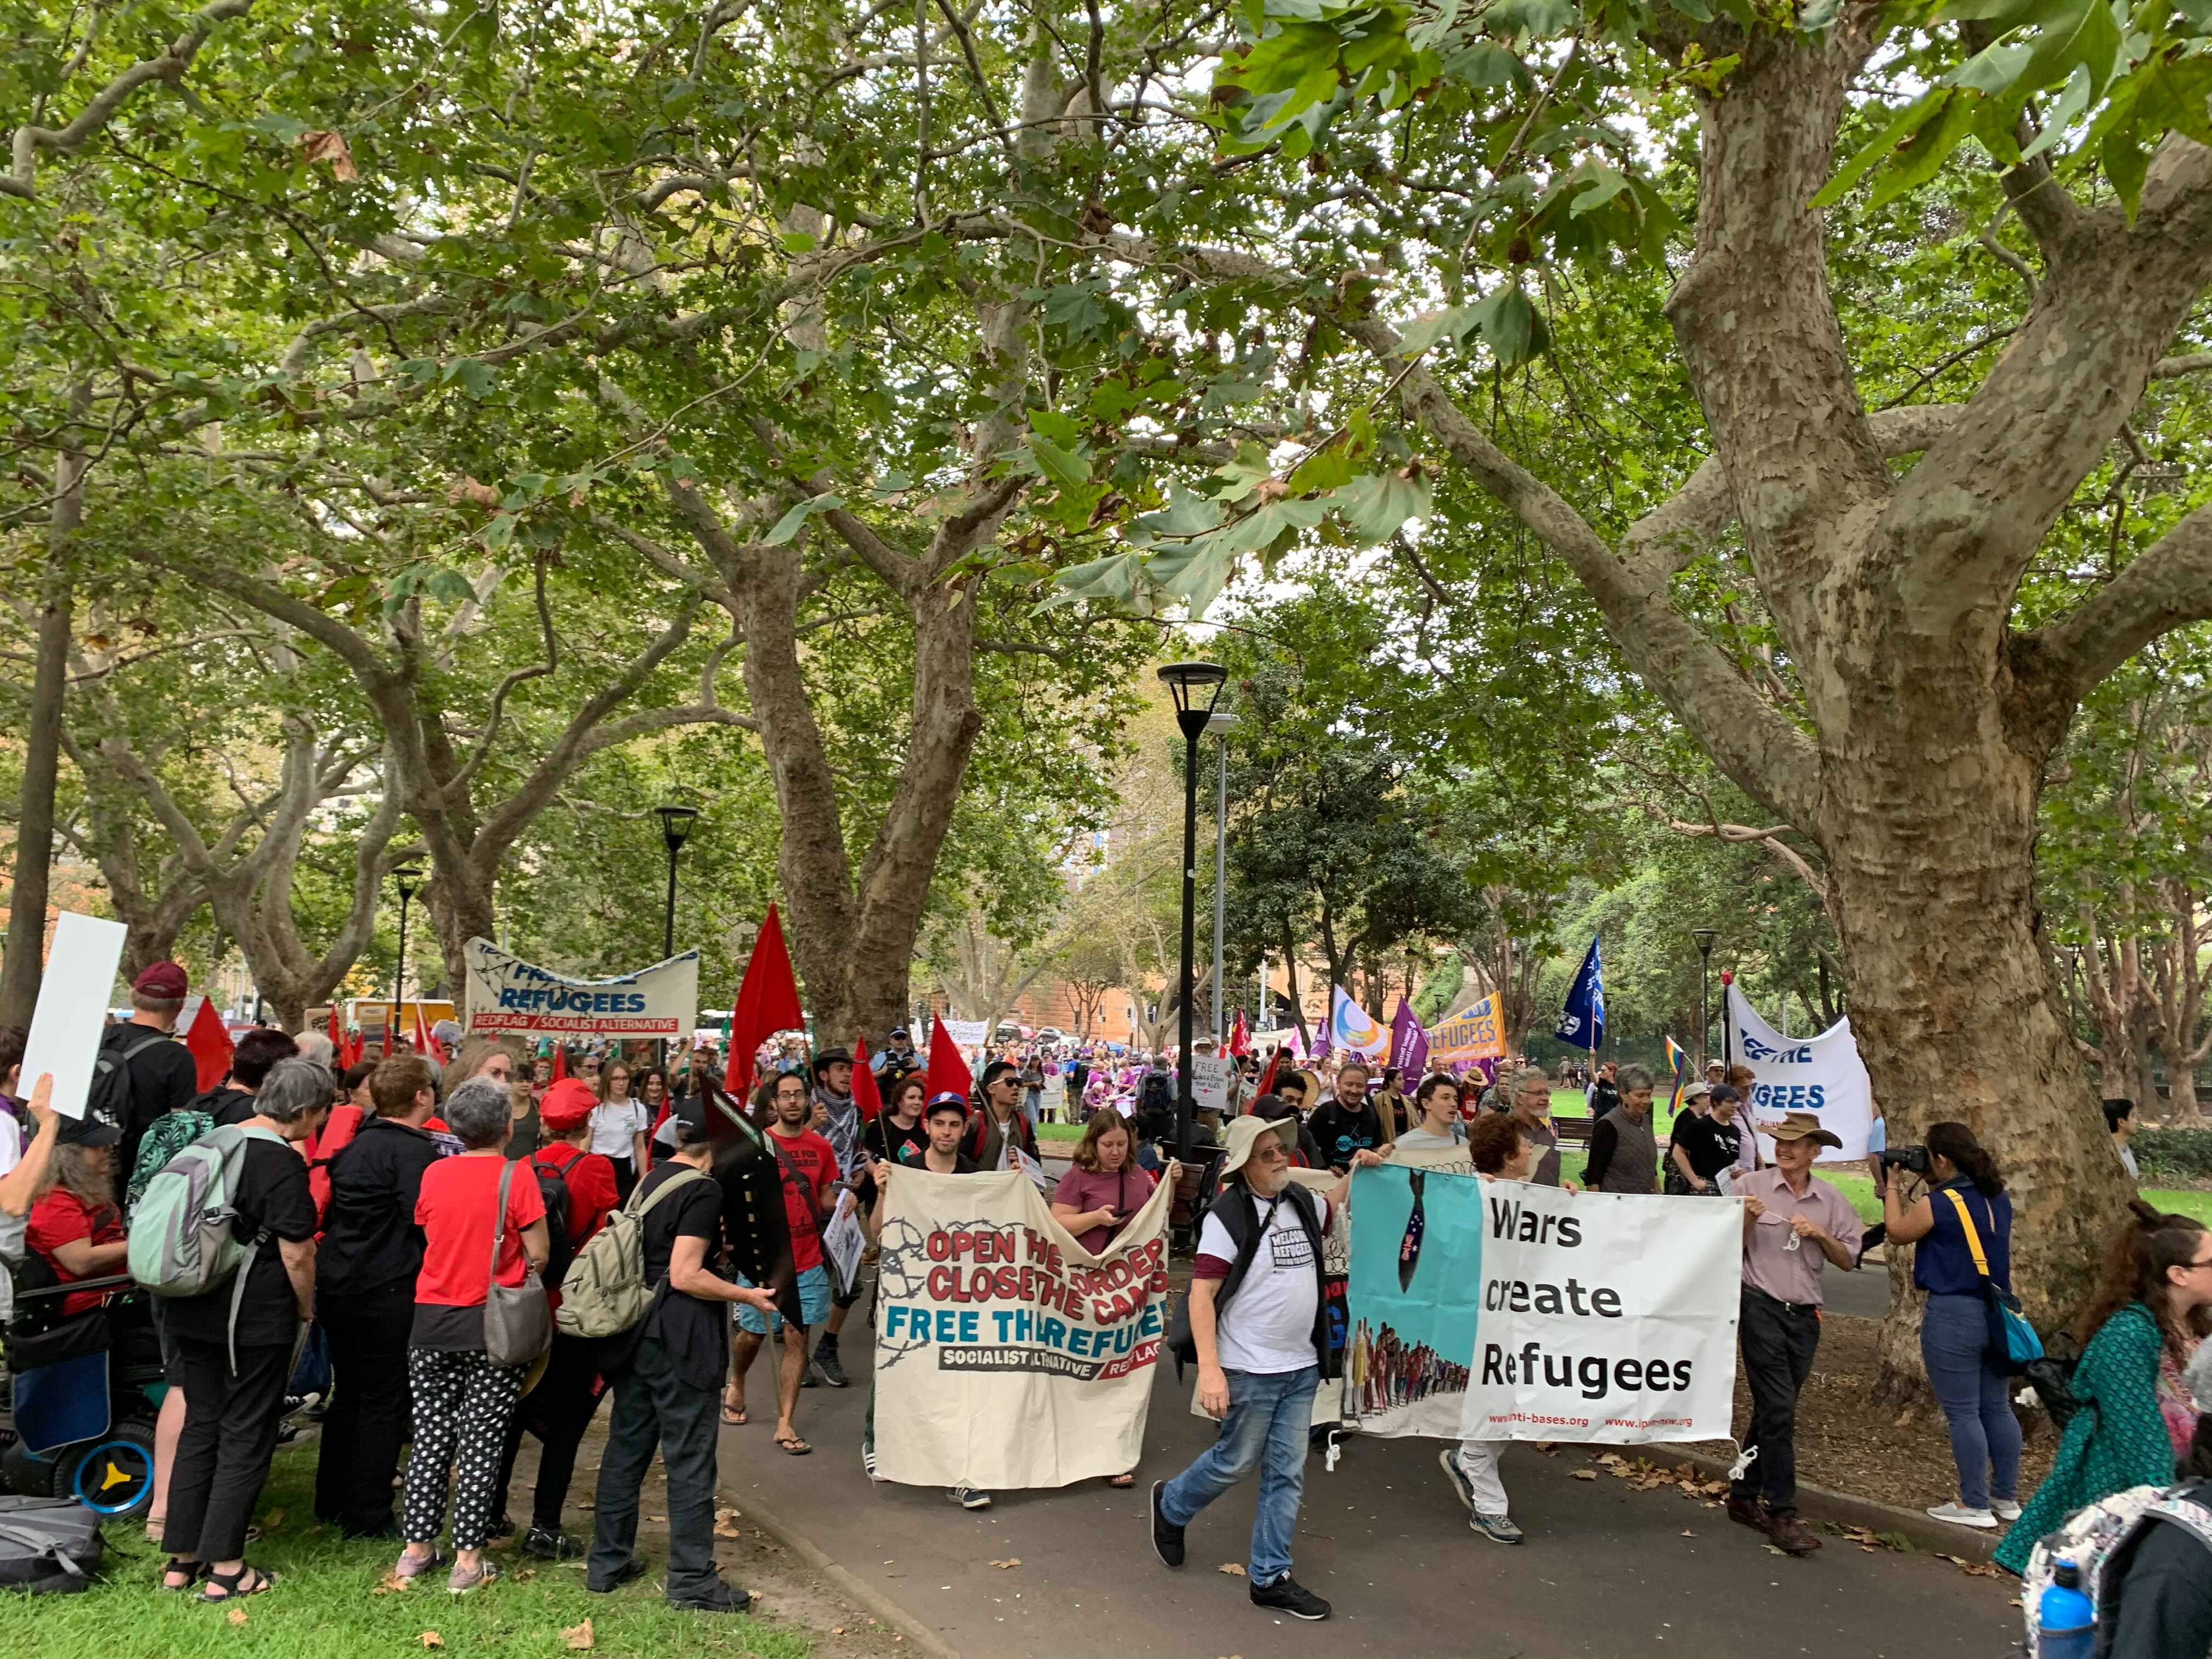 The contingent makes its way through Belmore Park, led by two banners: "Open the borders close the camps free the refugees now" and "wars create refugees" 